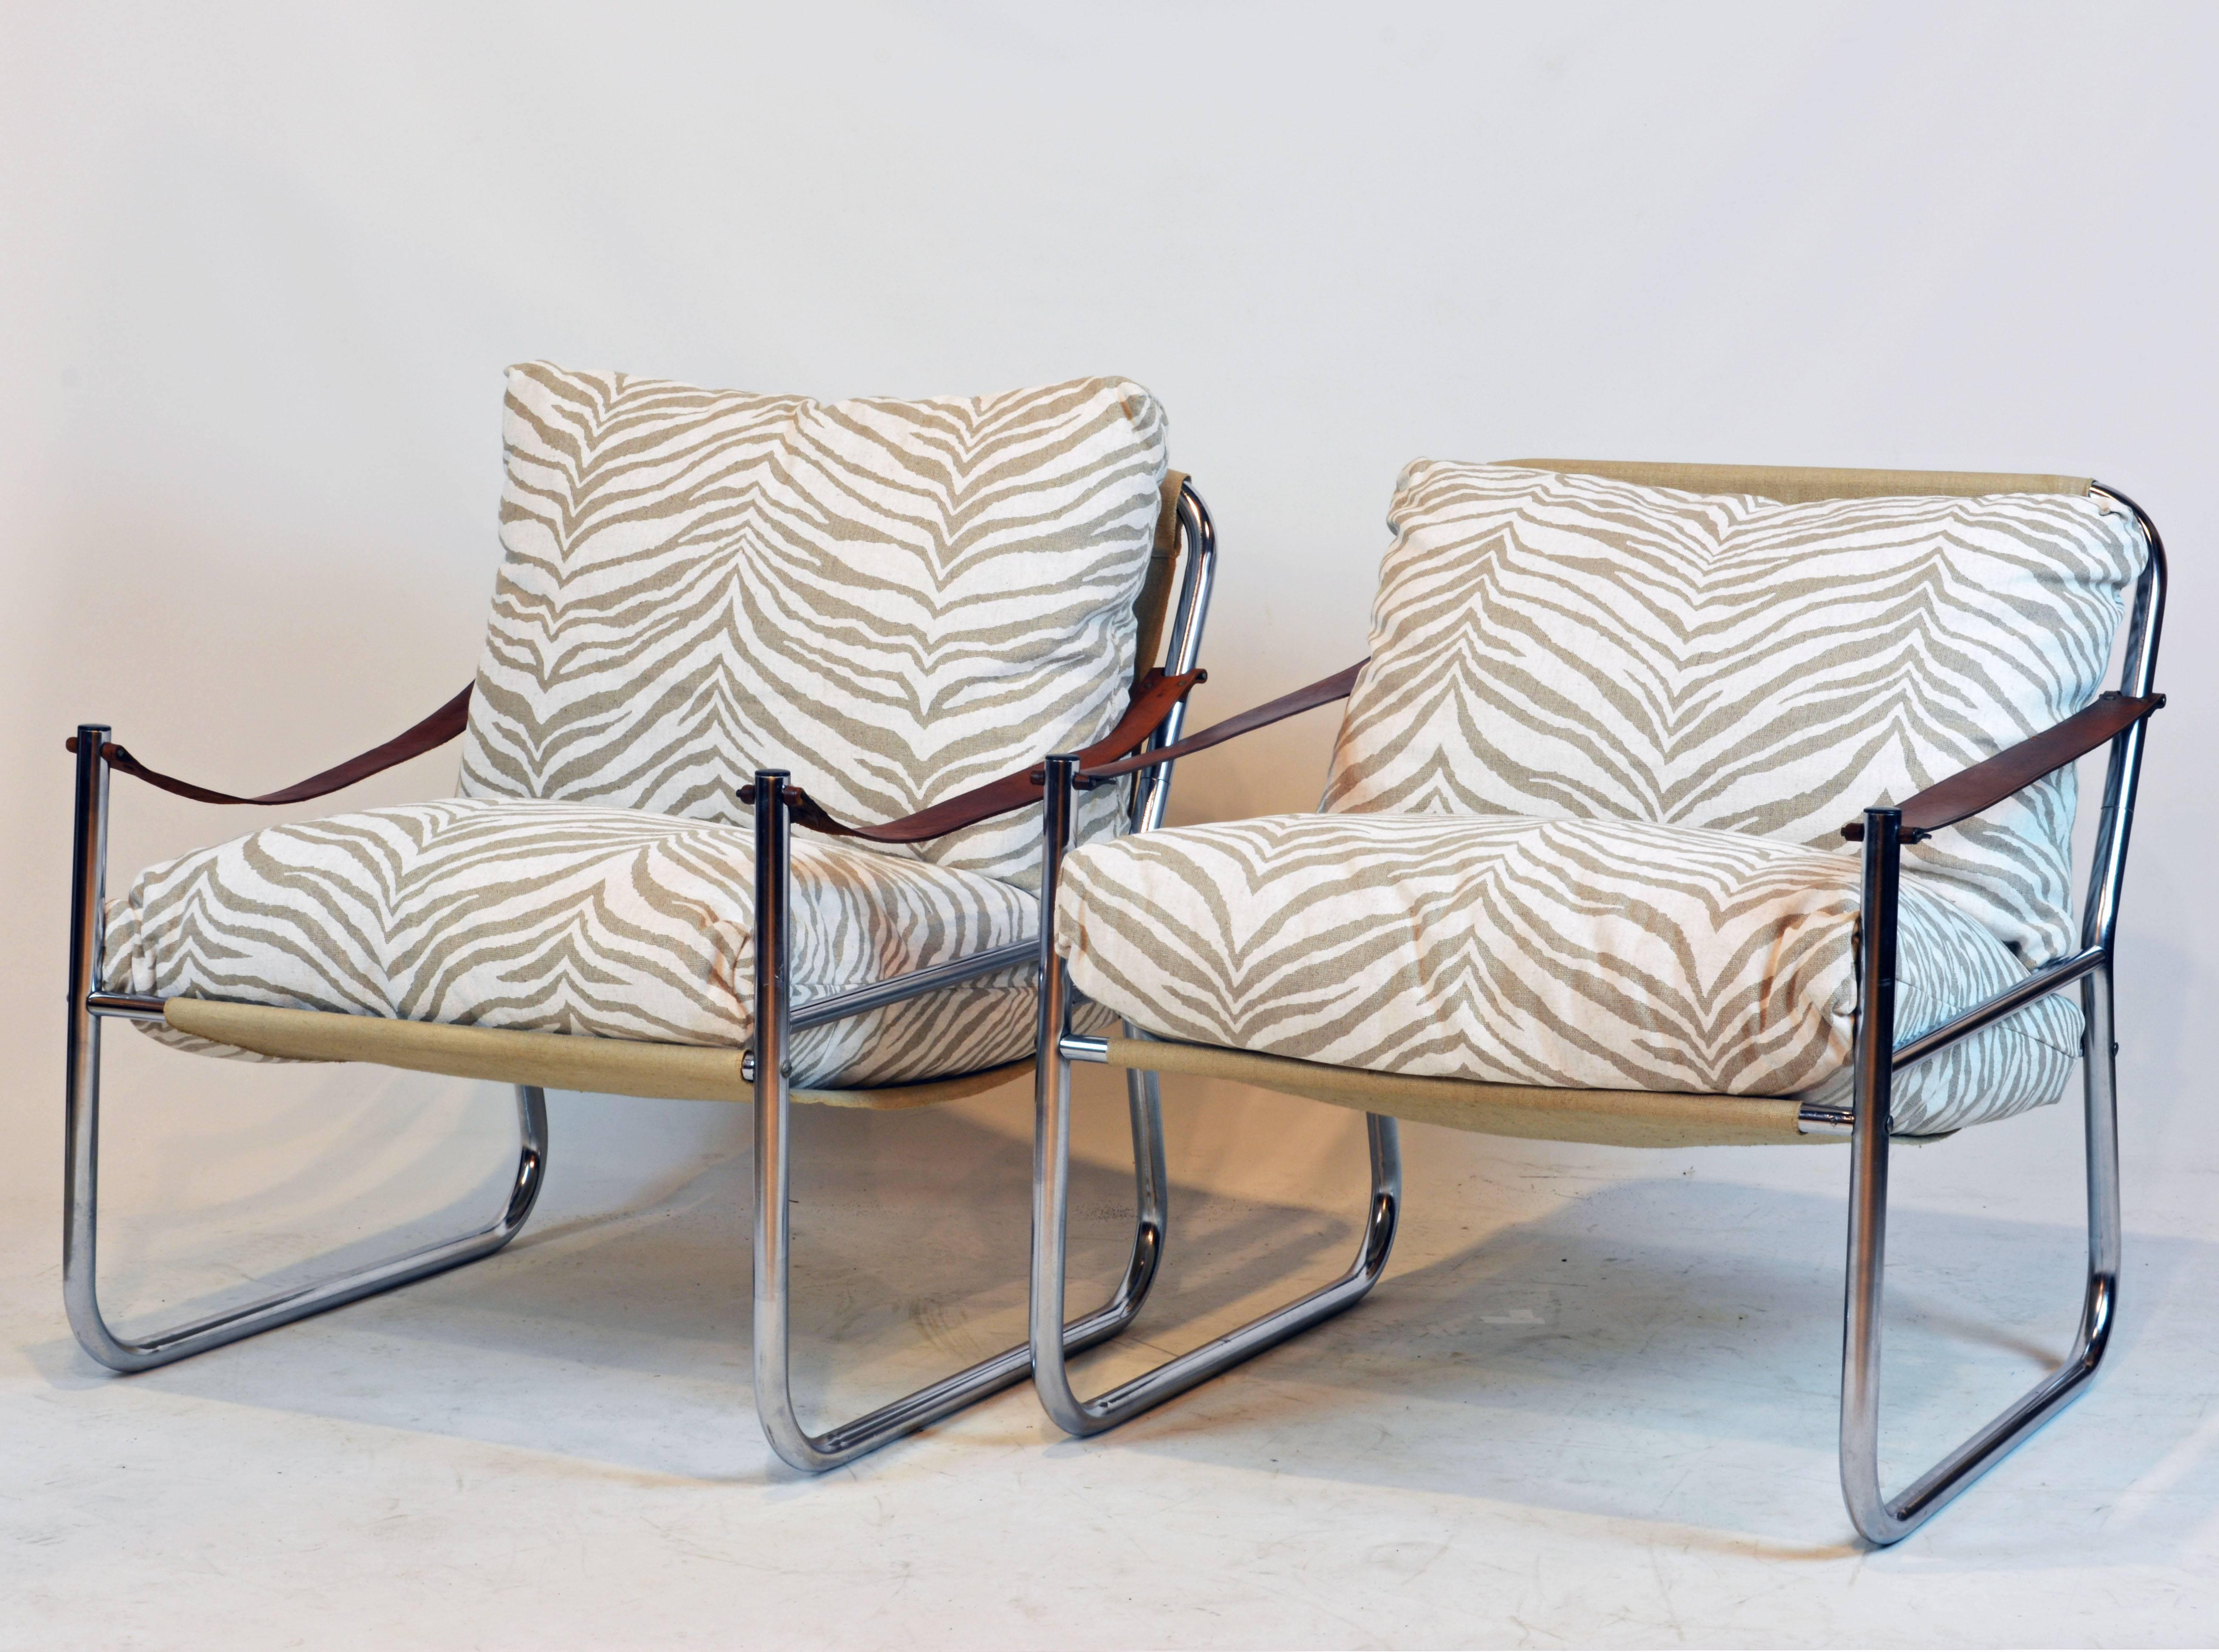 These comfortable sling style chairs feature leather strap armrests and a chrome frame supporting suspended canvas seat and back. Custom-made cushions covered with elegant gray shade zebra-pattern complete the picture.